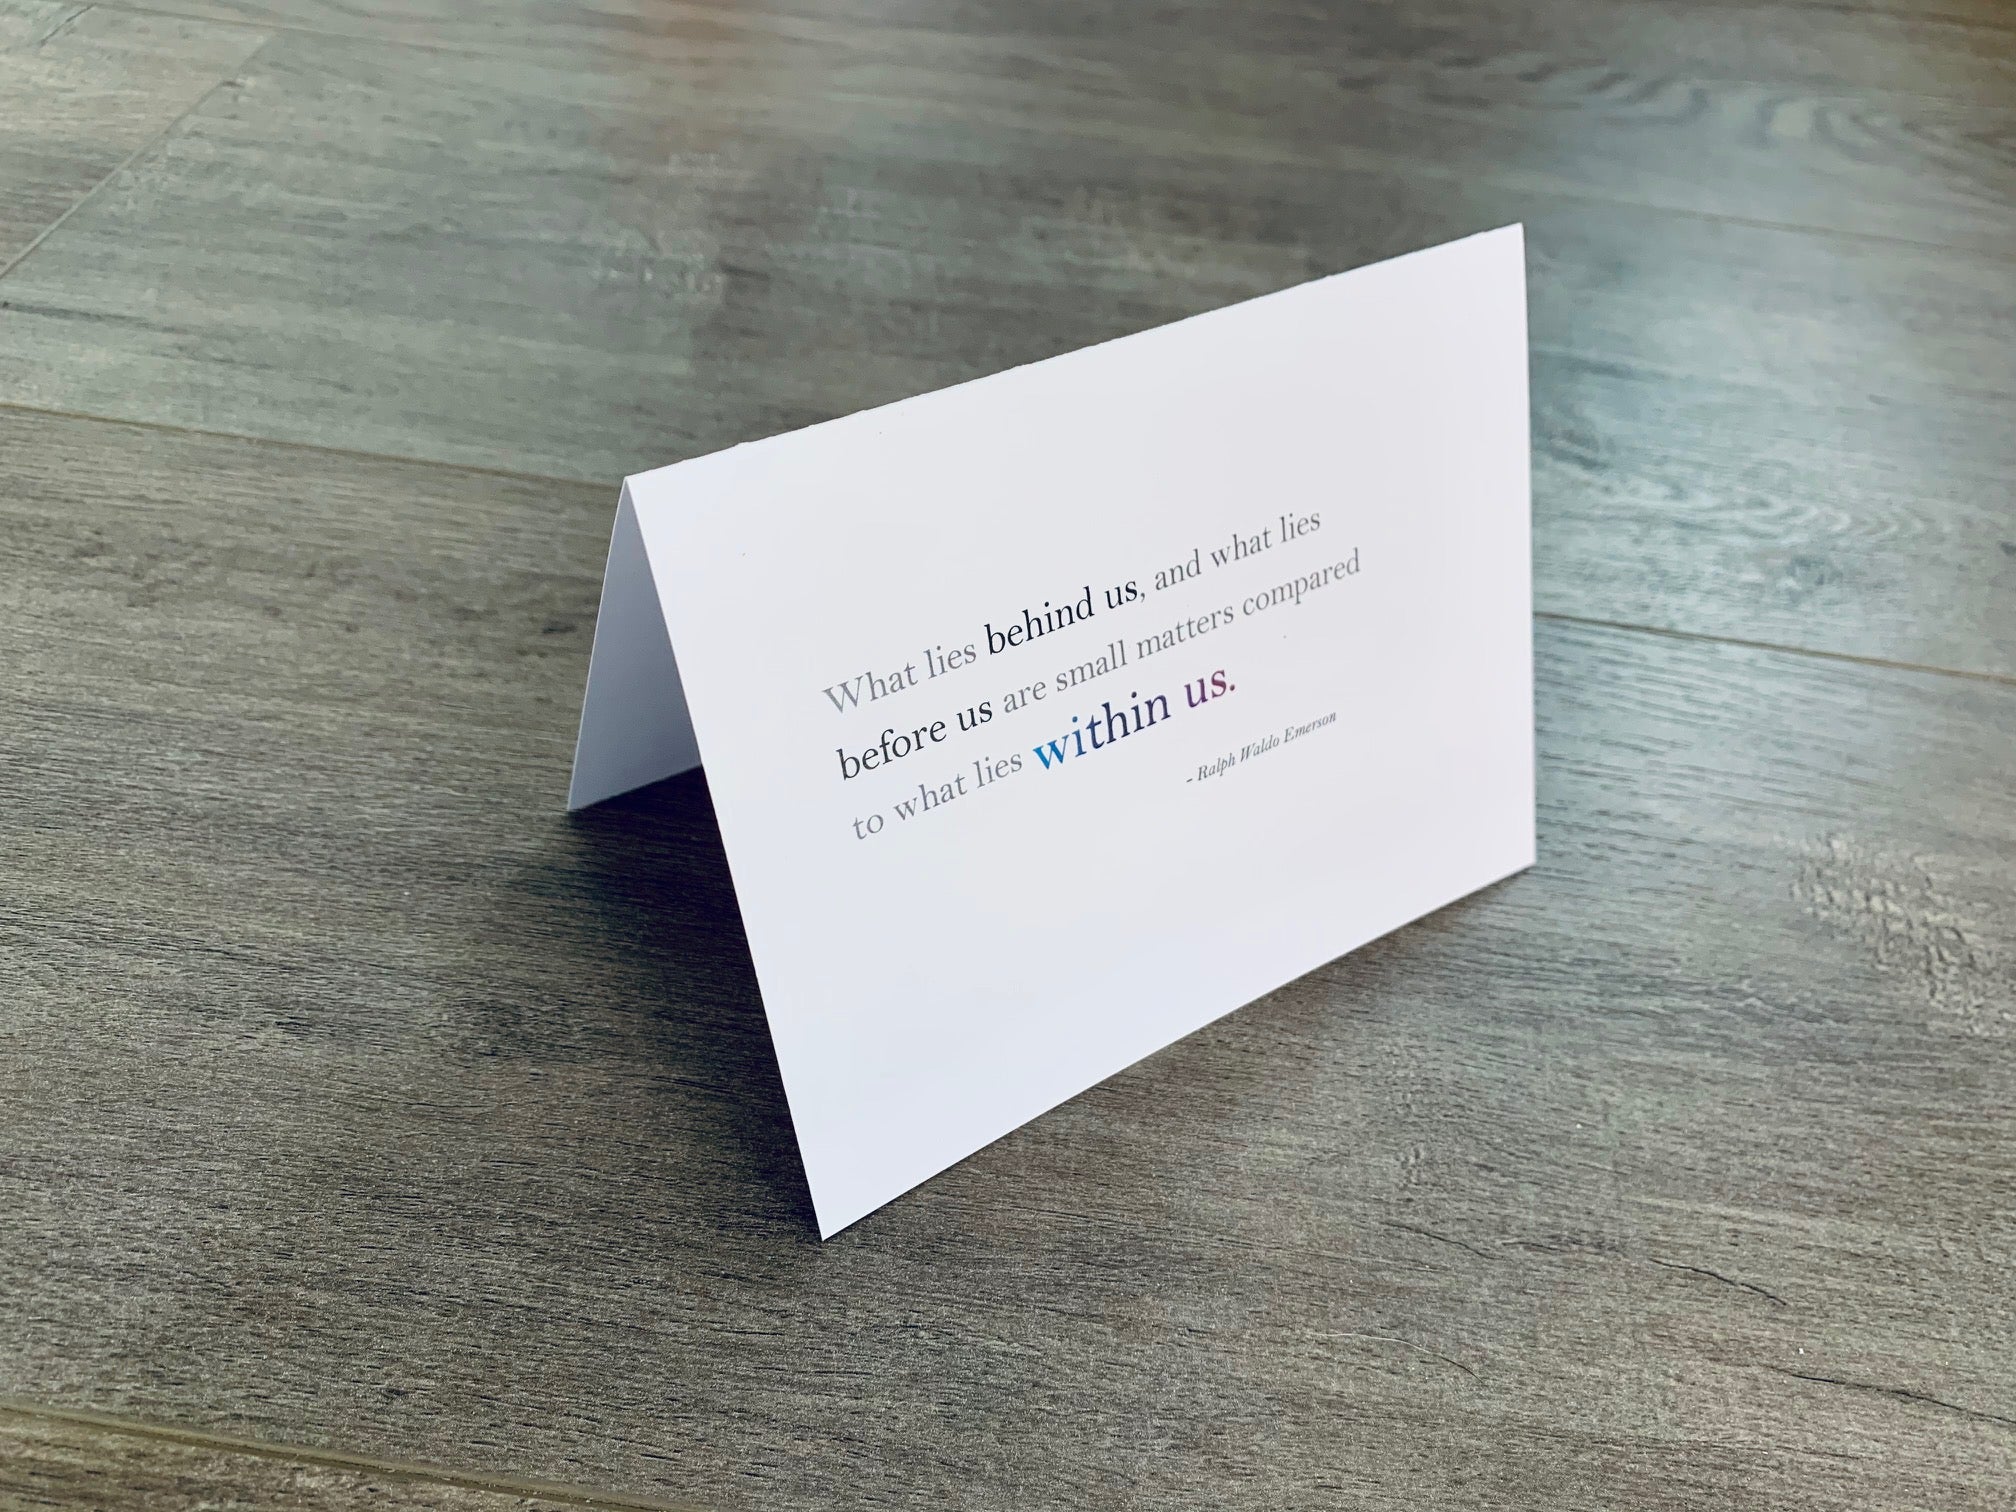 A white, folded notecard sits on a wooden floor. The card has a Ralph Waldo Emerson quote on it. It says, "What lies behind us, and what lies before us are small matters compared to what lies within us." Congrats collection by Stationare.